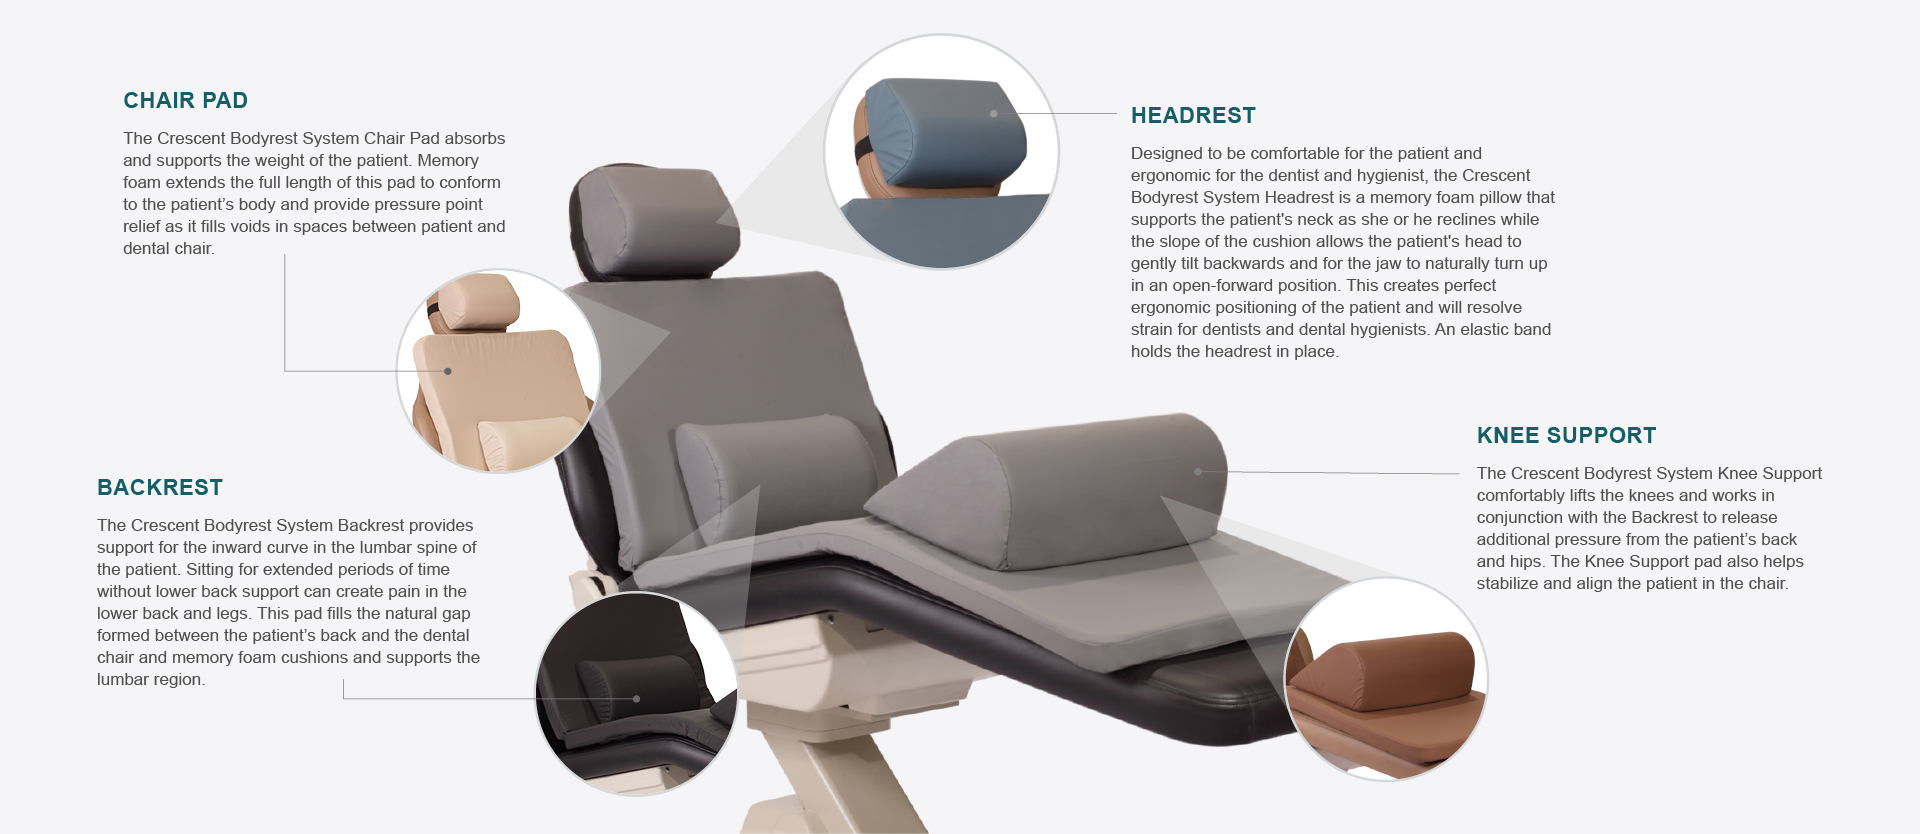 Crescent Products Bodyrest system